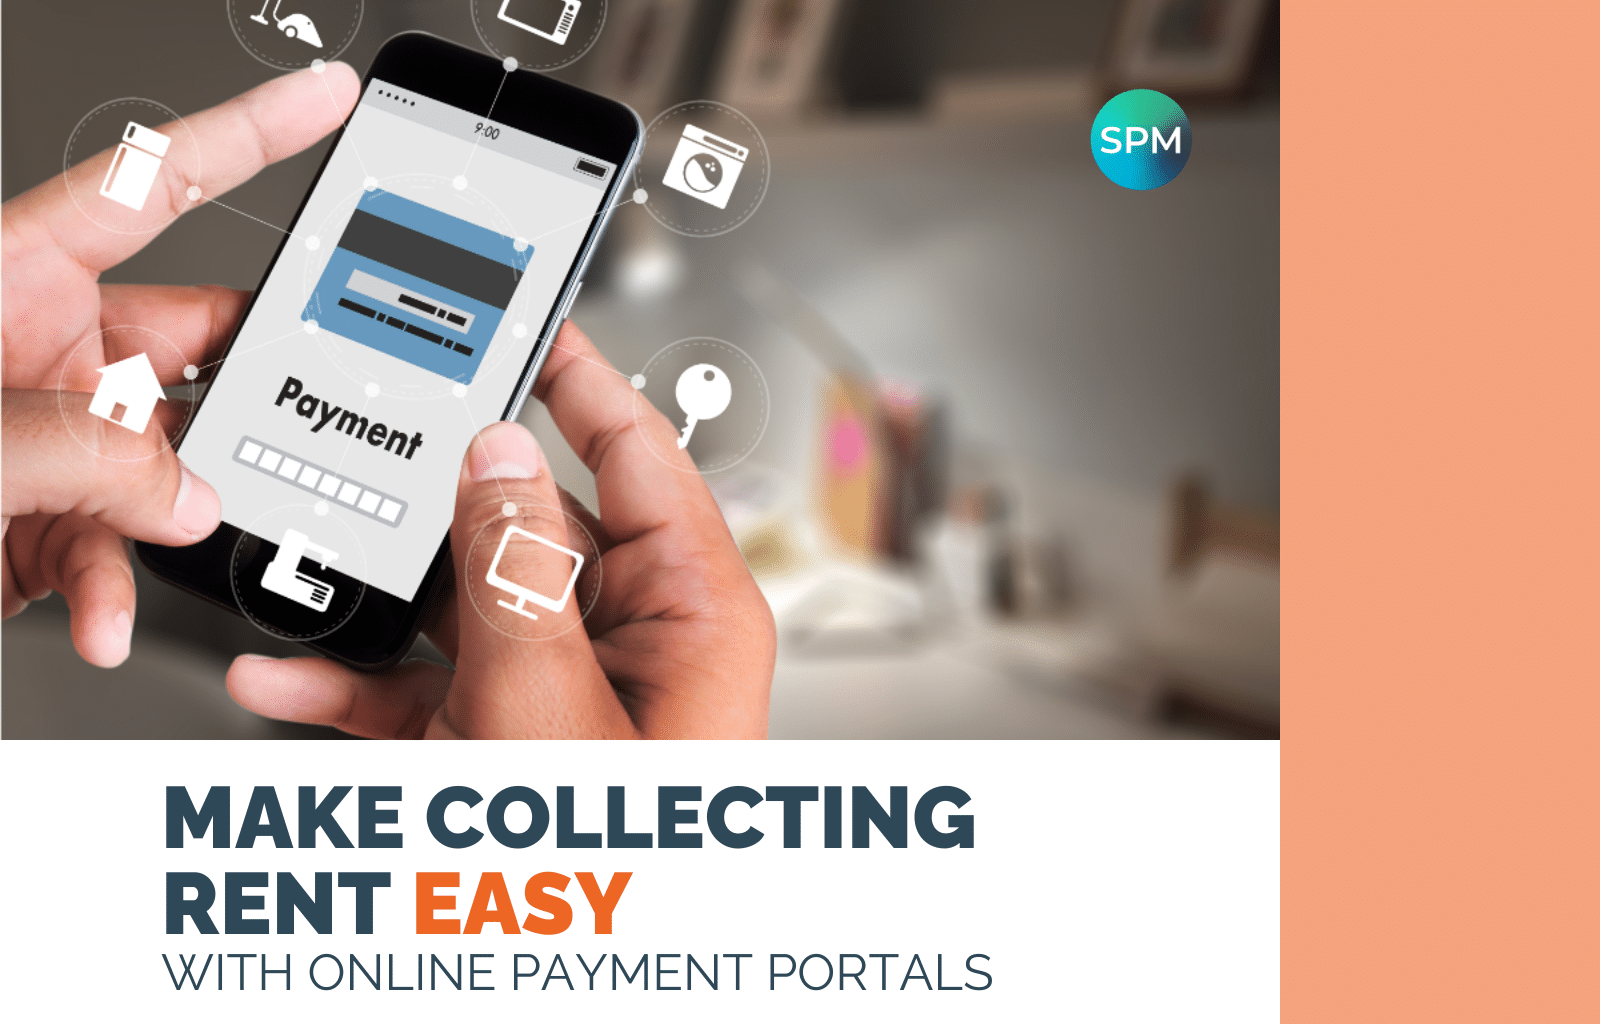 Make Collecting Rent Easy with Online Payment Portals